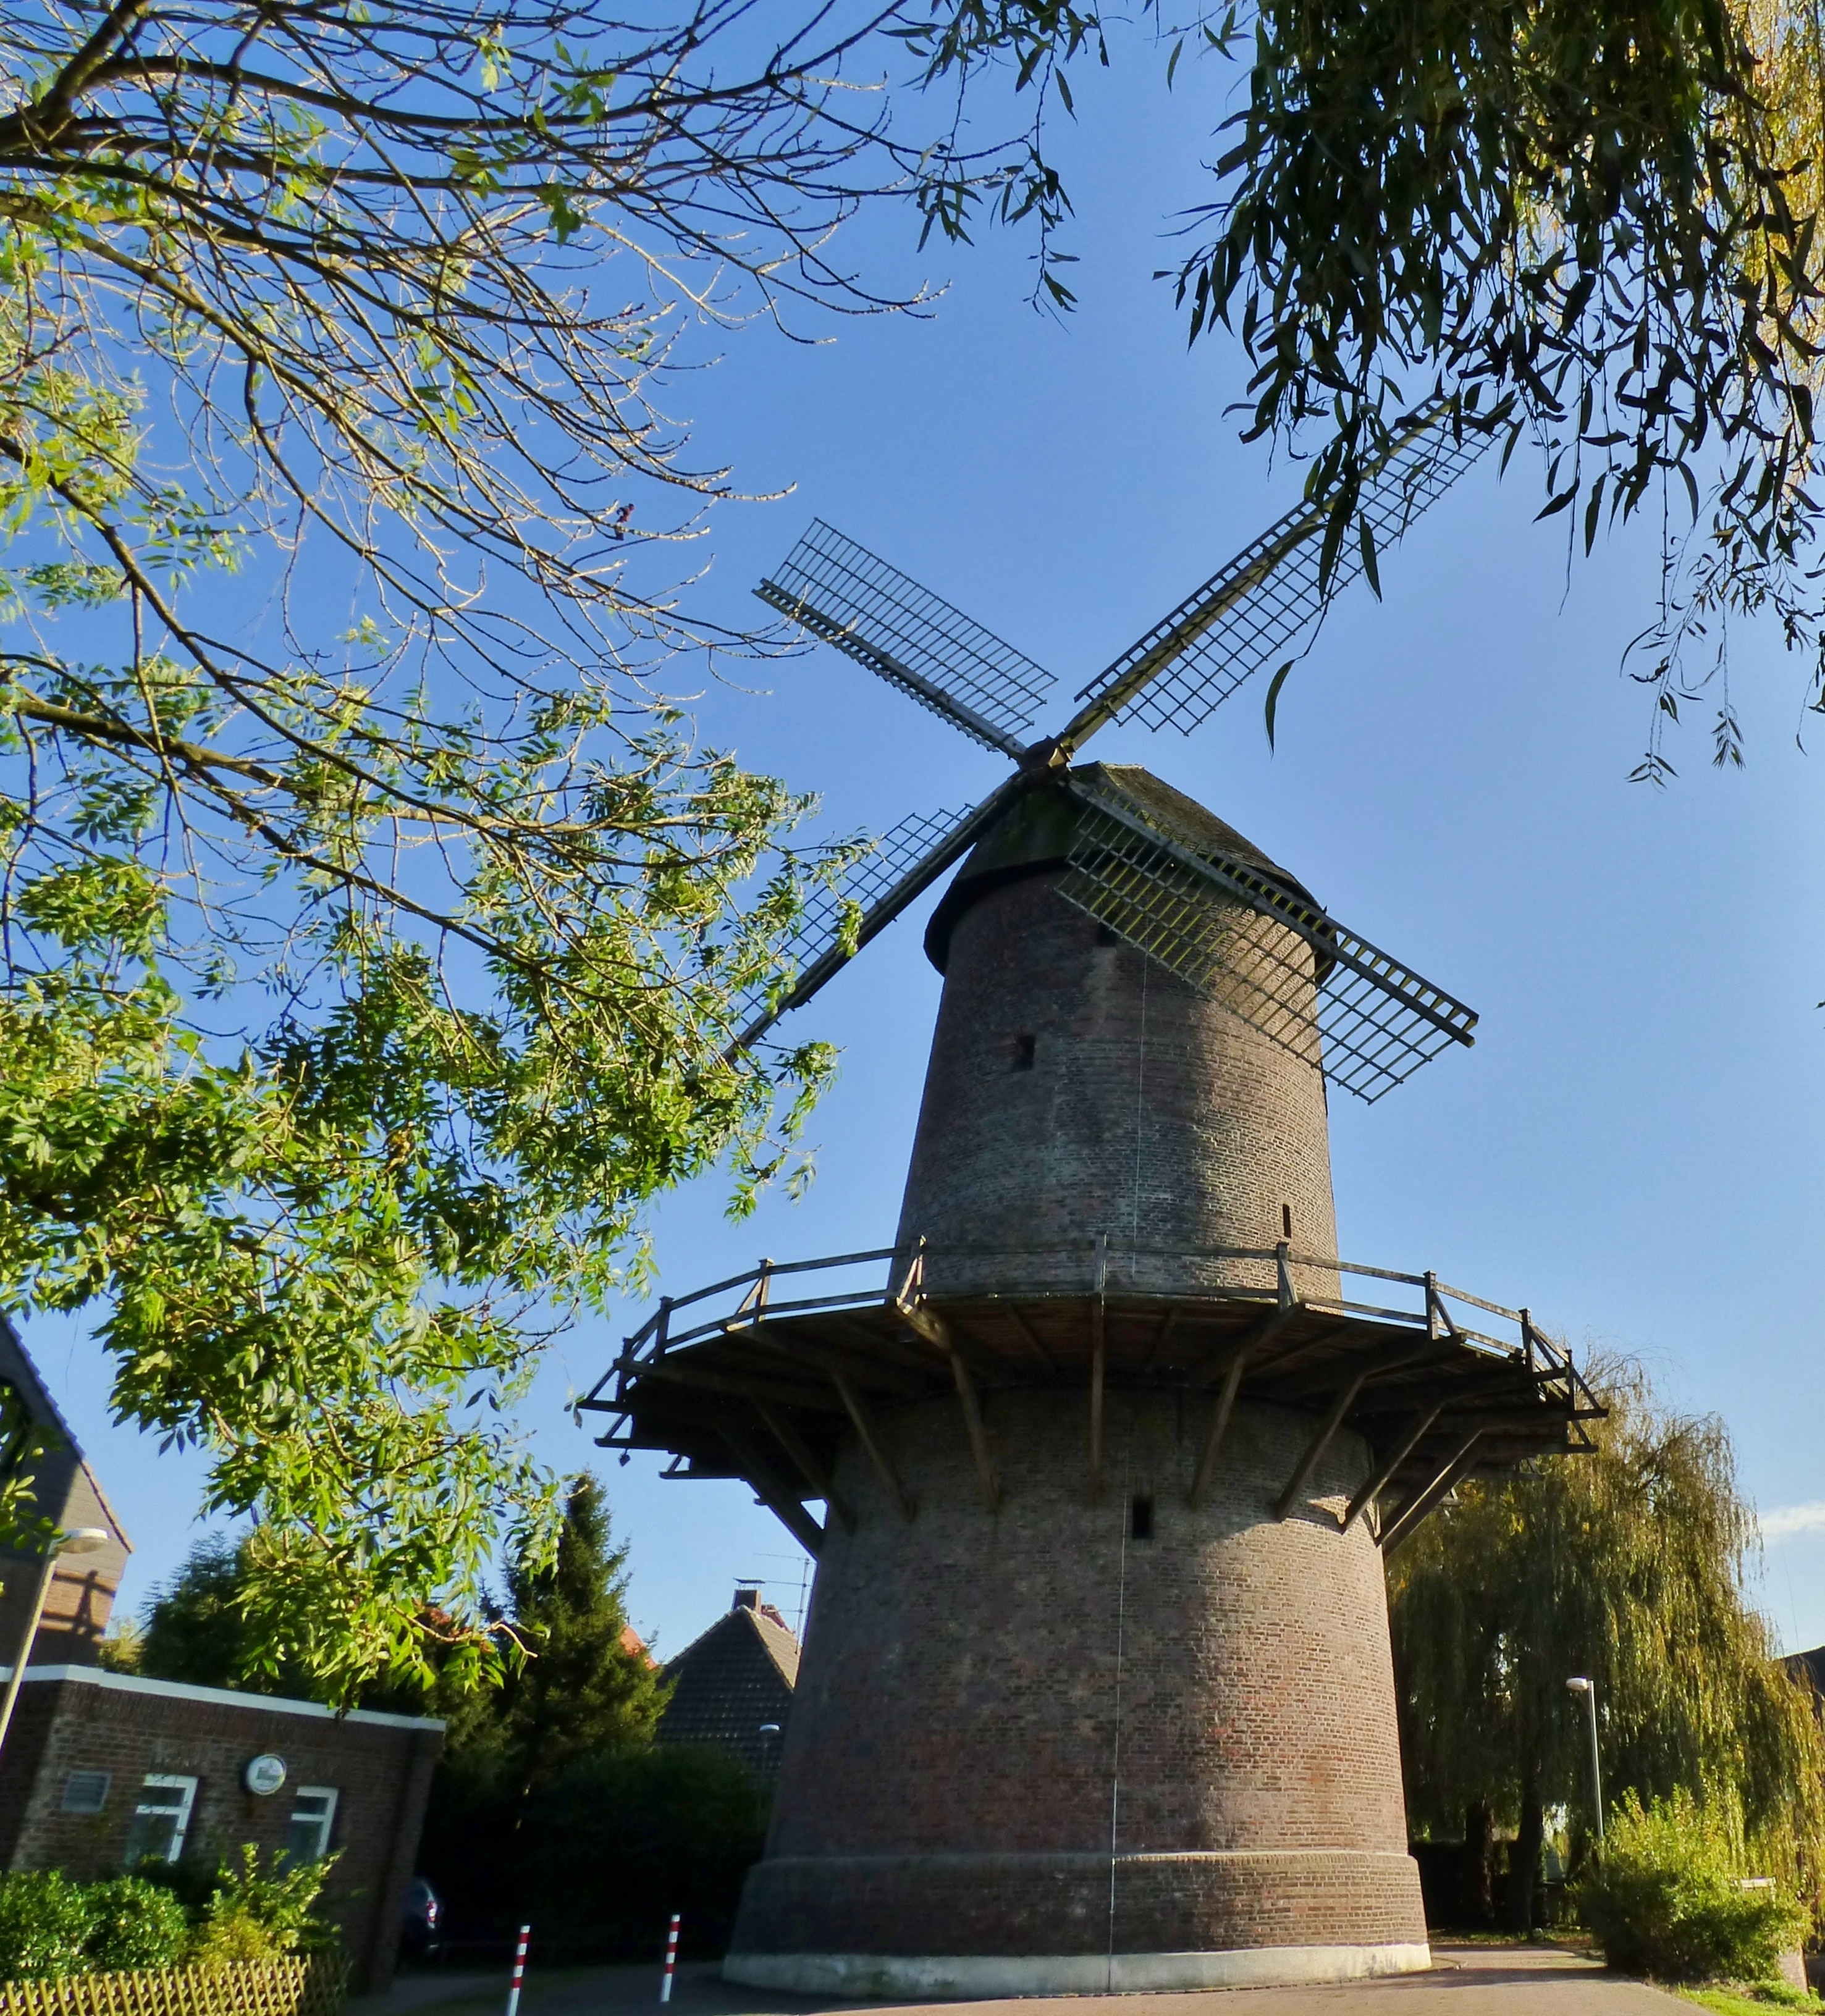 brown concrete wind mill surrounded by trees under blue sky